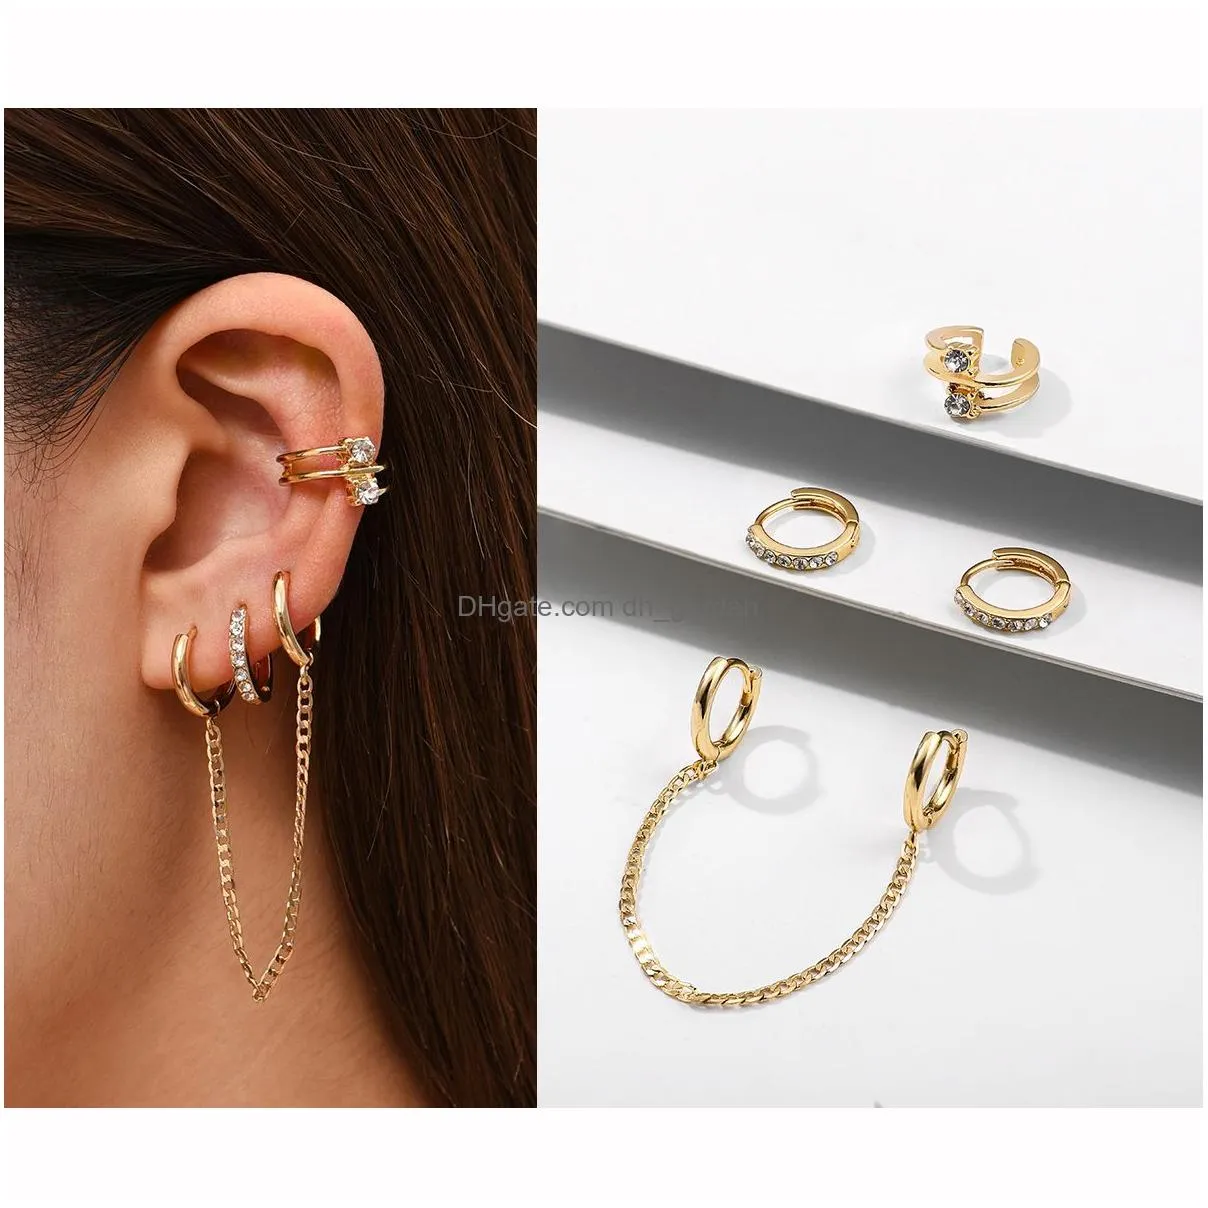 Punk Rock Helix Fake Cartilage Ear Cuff With Long Chain Circle Hoop Earrings Set For Women Tiny Piercing Hie Earring Jewelry Dhgarden Ot715